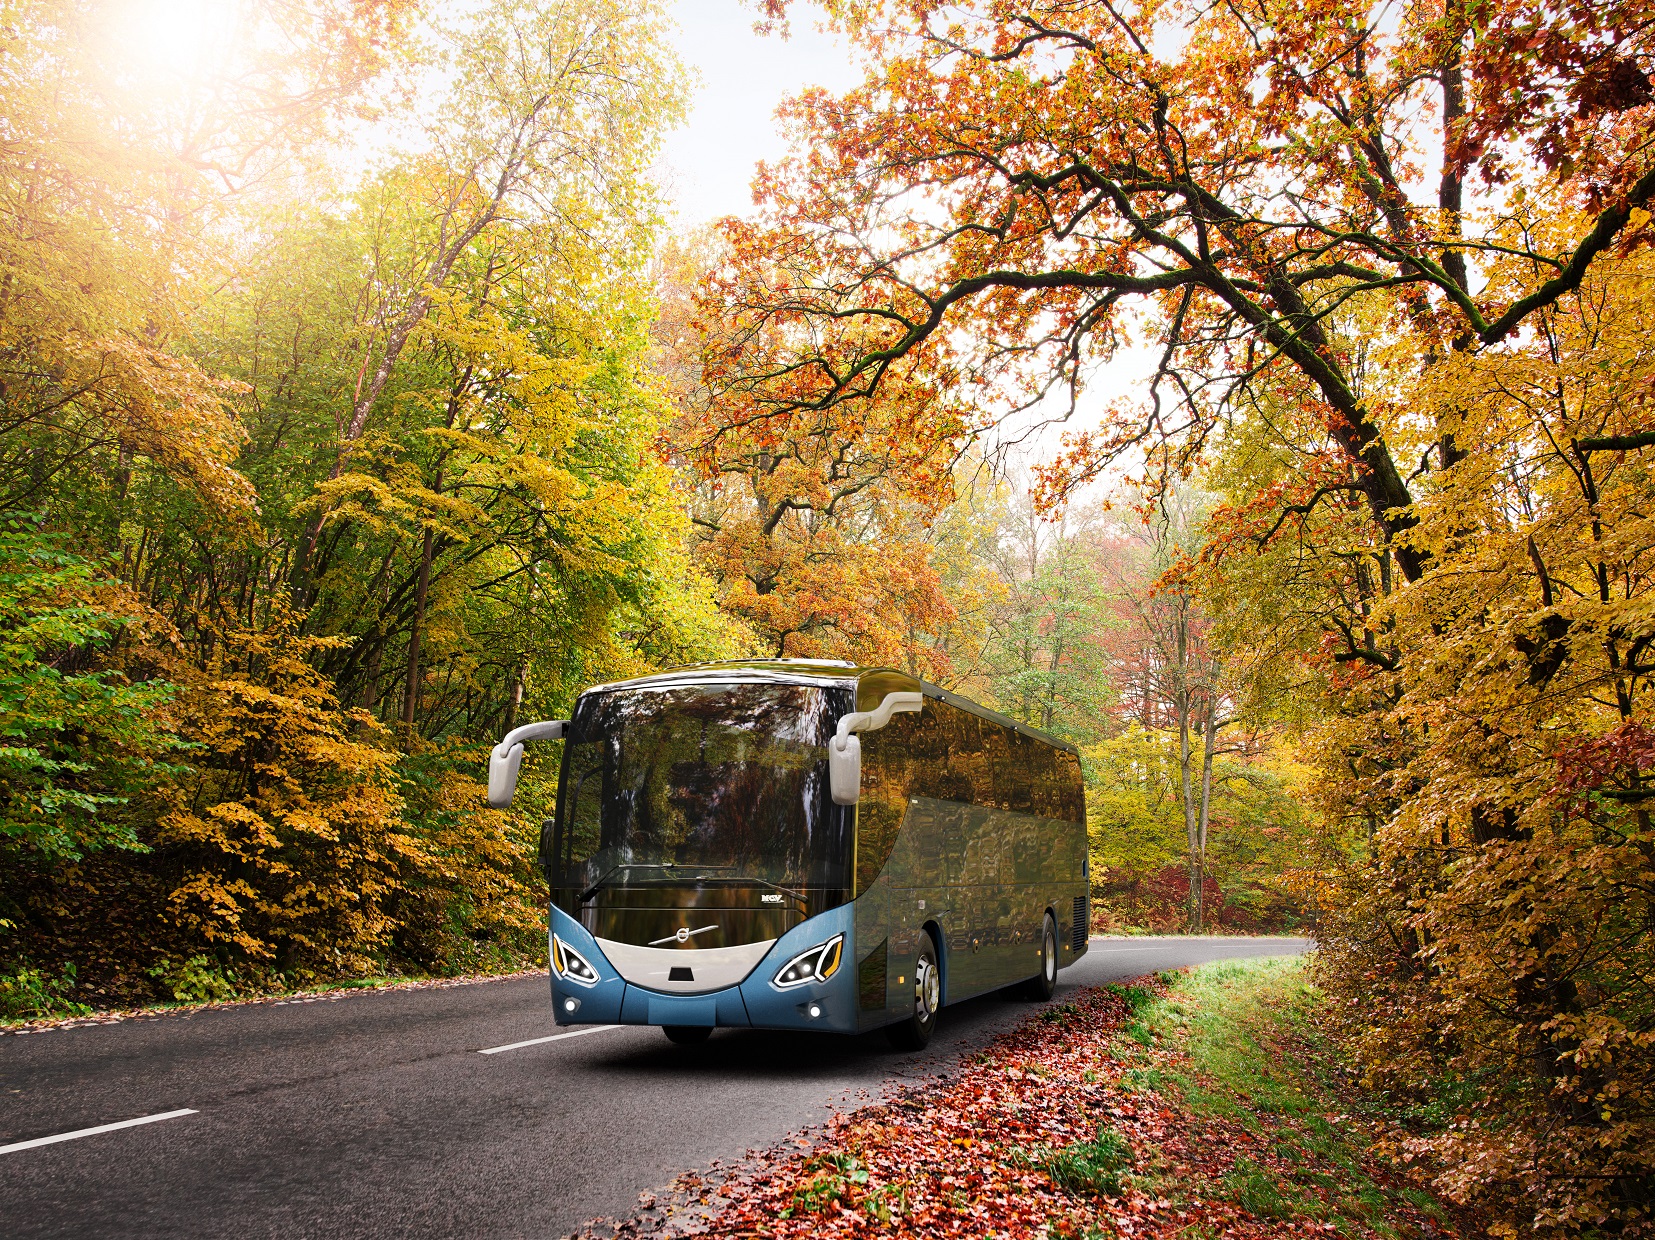 Top Reasons to Hire a Coach for Your North Yorkshire Trip